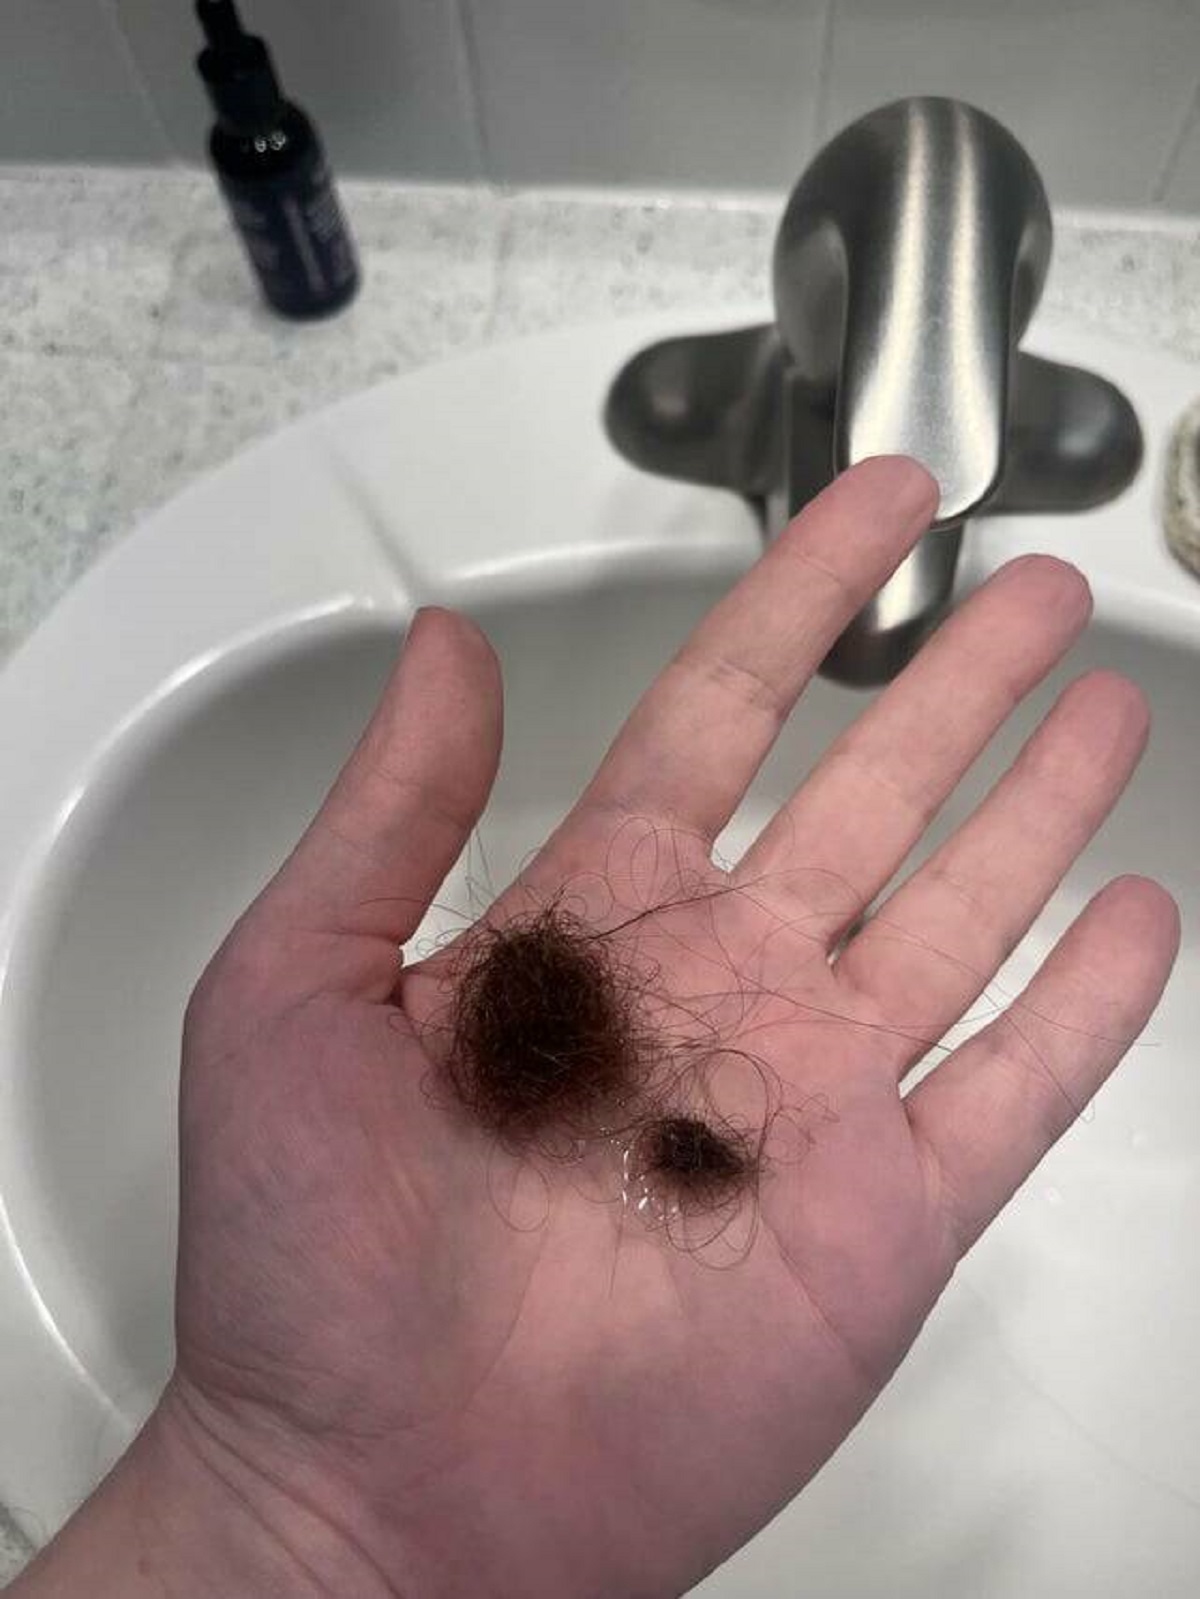 "How much hair I’m losing per day"